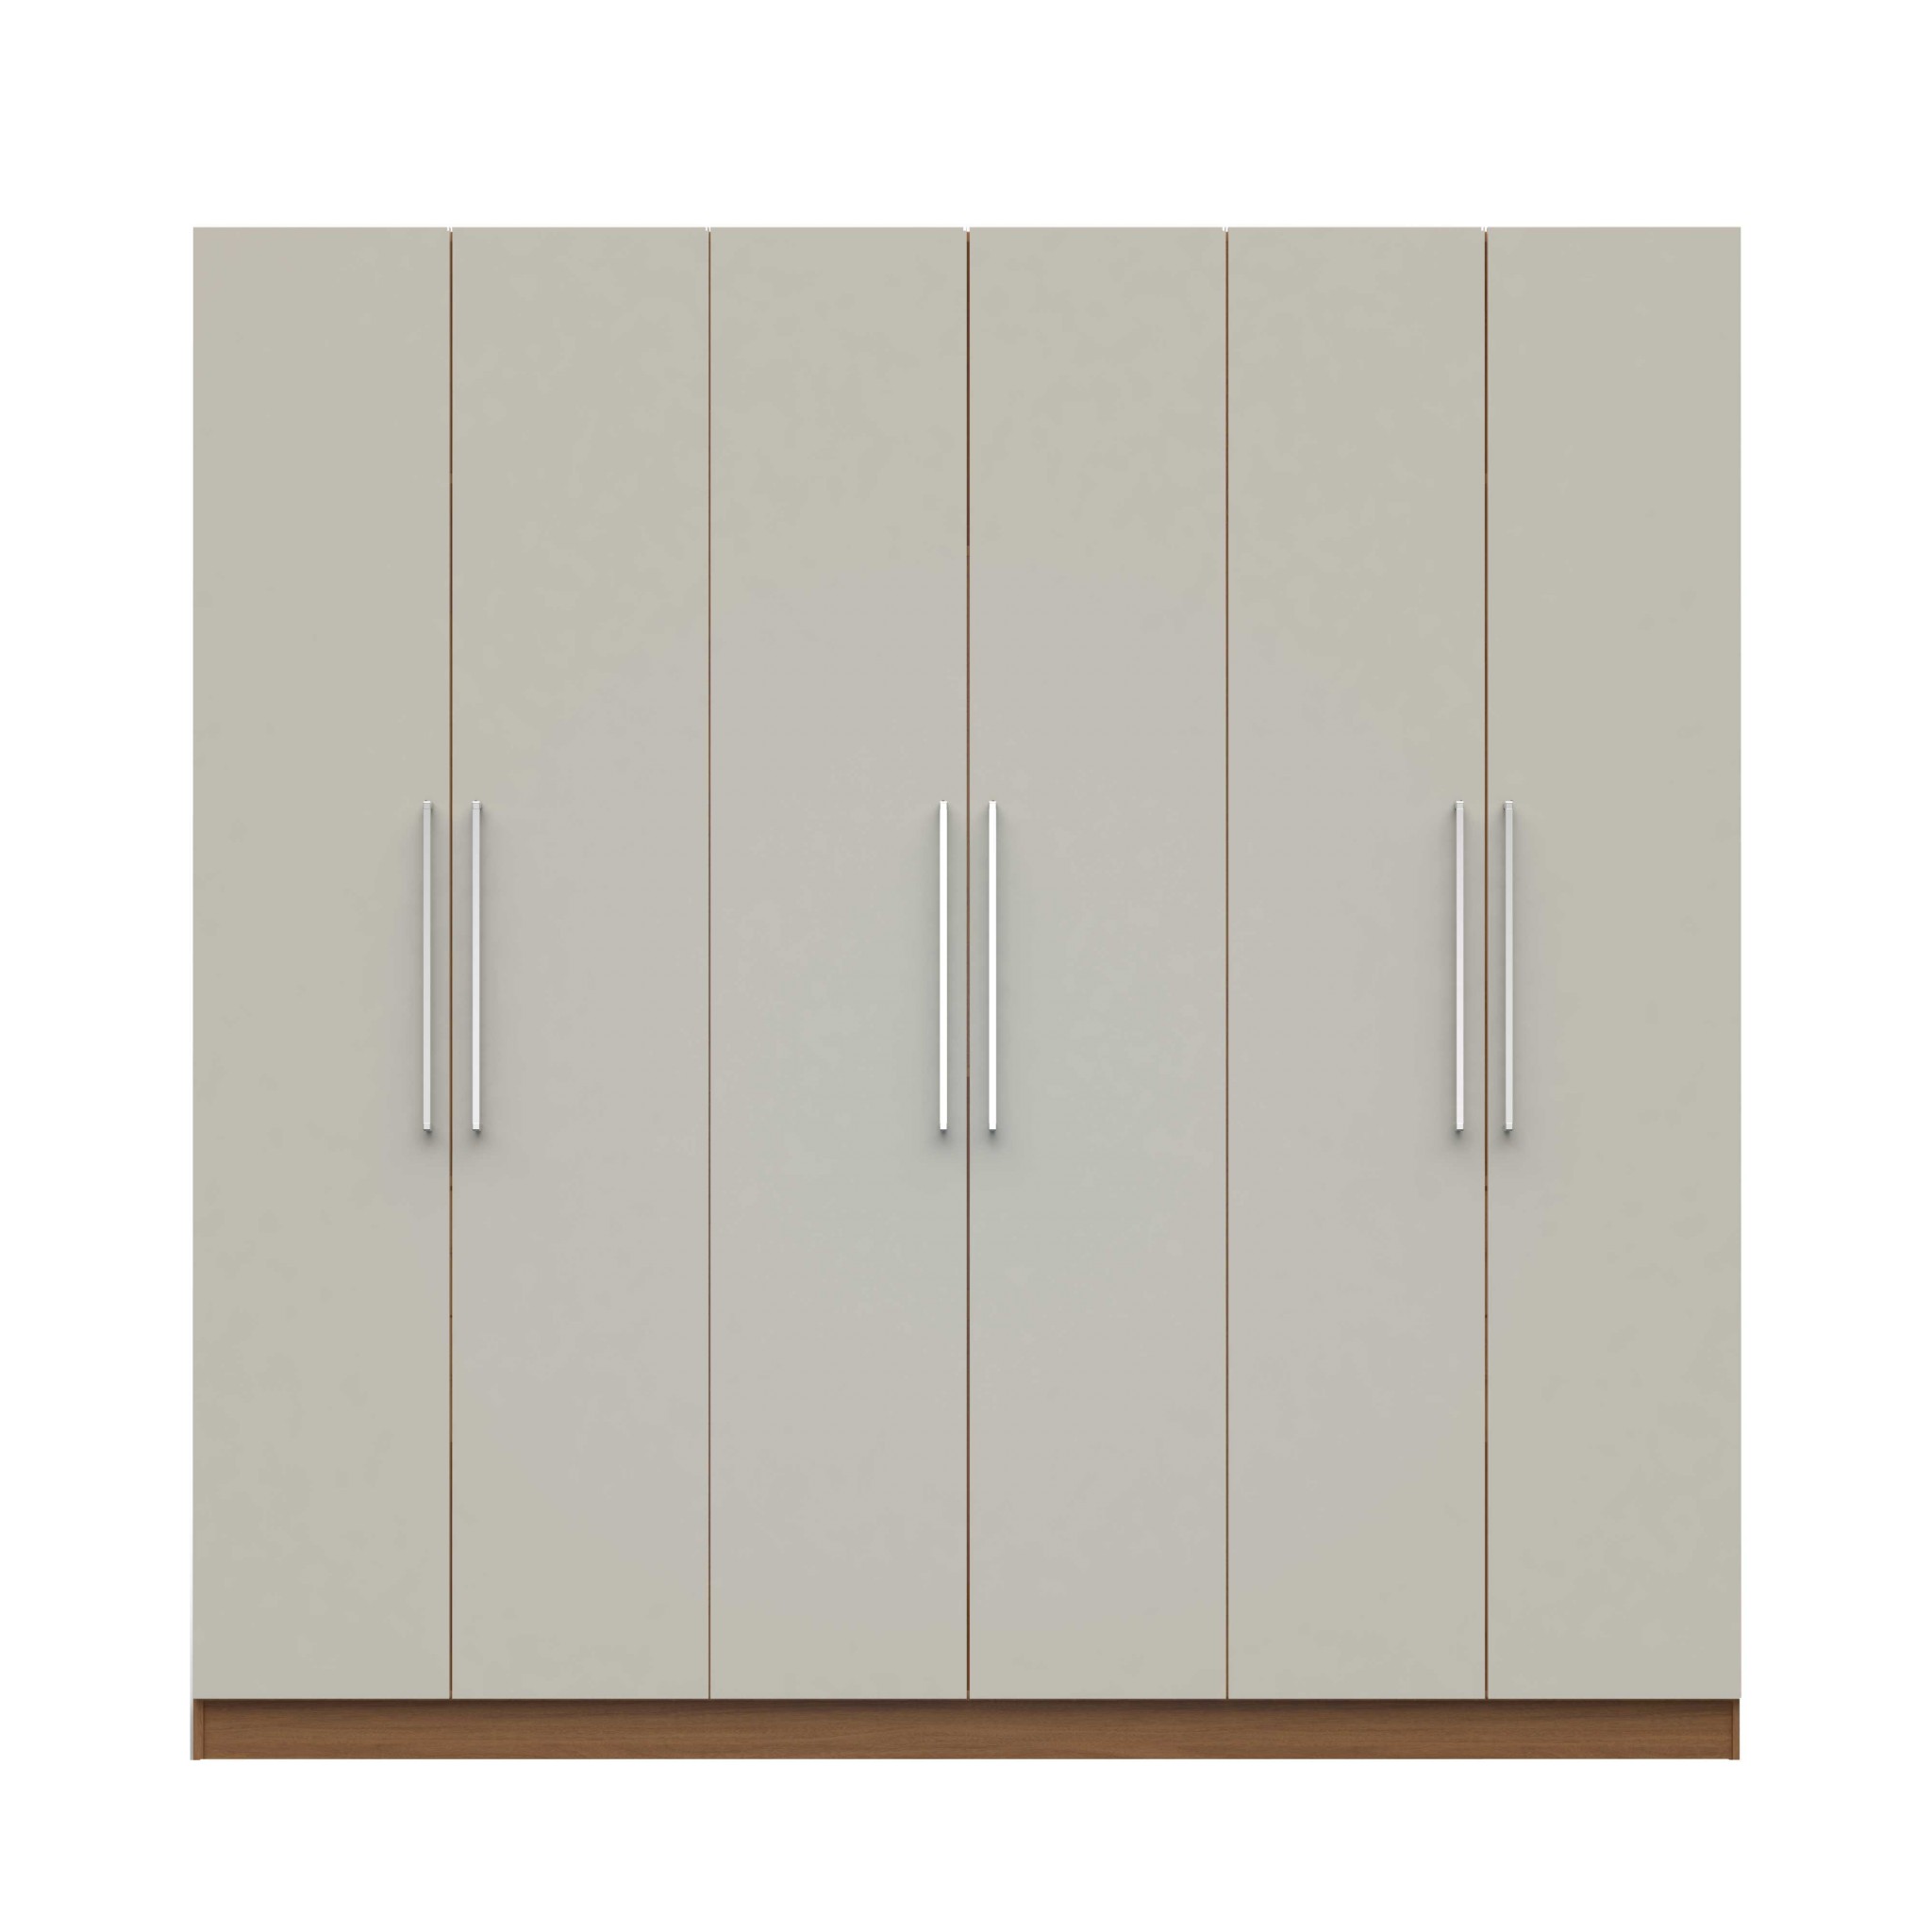 91" Maple Cream and Off White 3 Sectional Wardrobe with 4 Drawers and 6 Doors